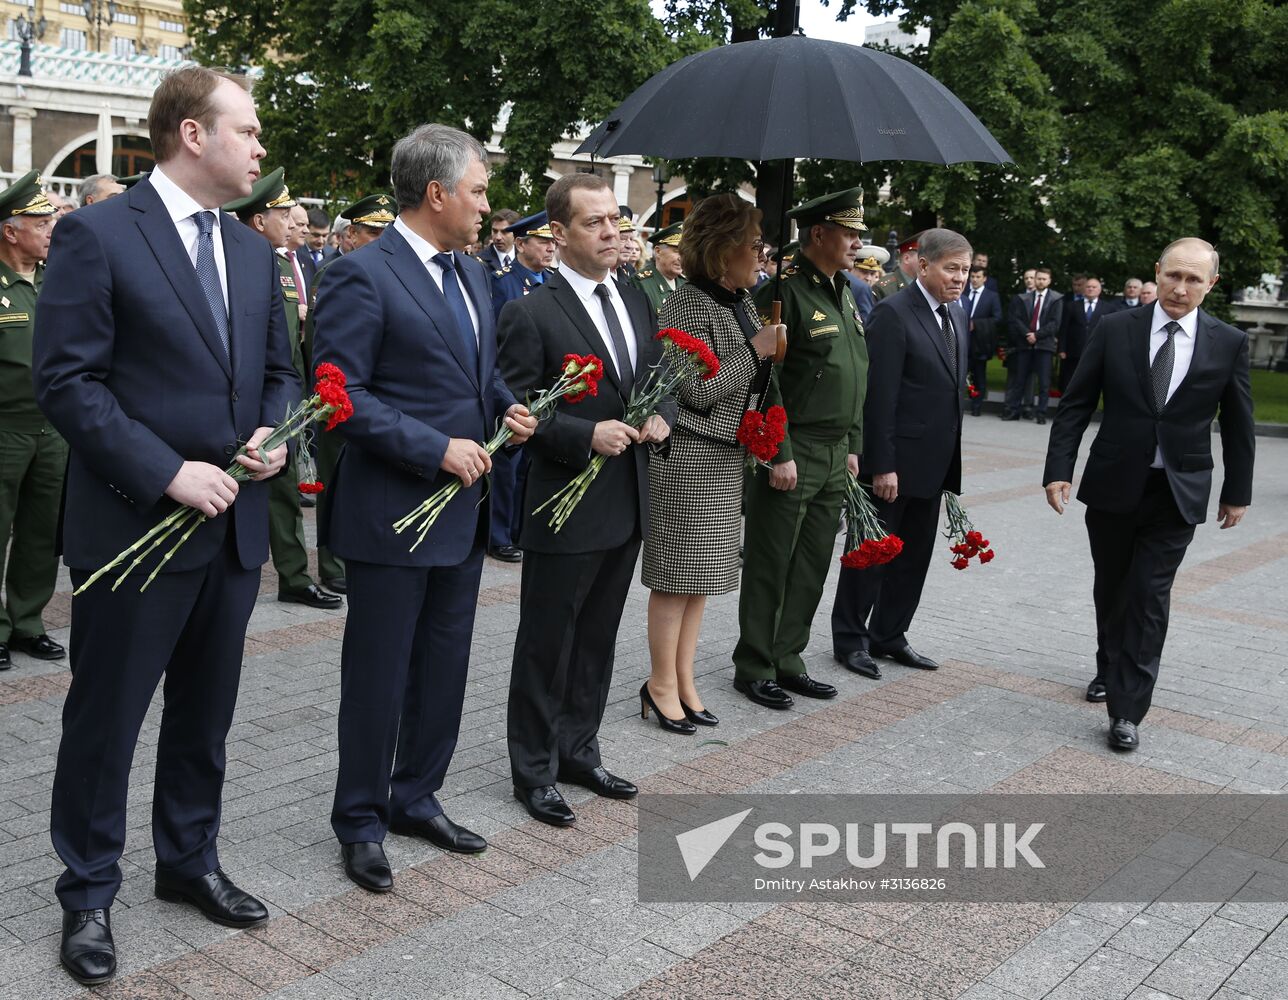 Russian President Vladimir Putin and Prime Minister Dmitry Medvedev lay flowers at Tomb of the Unknown Soldier